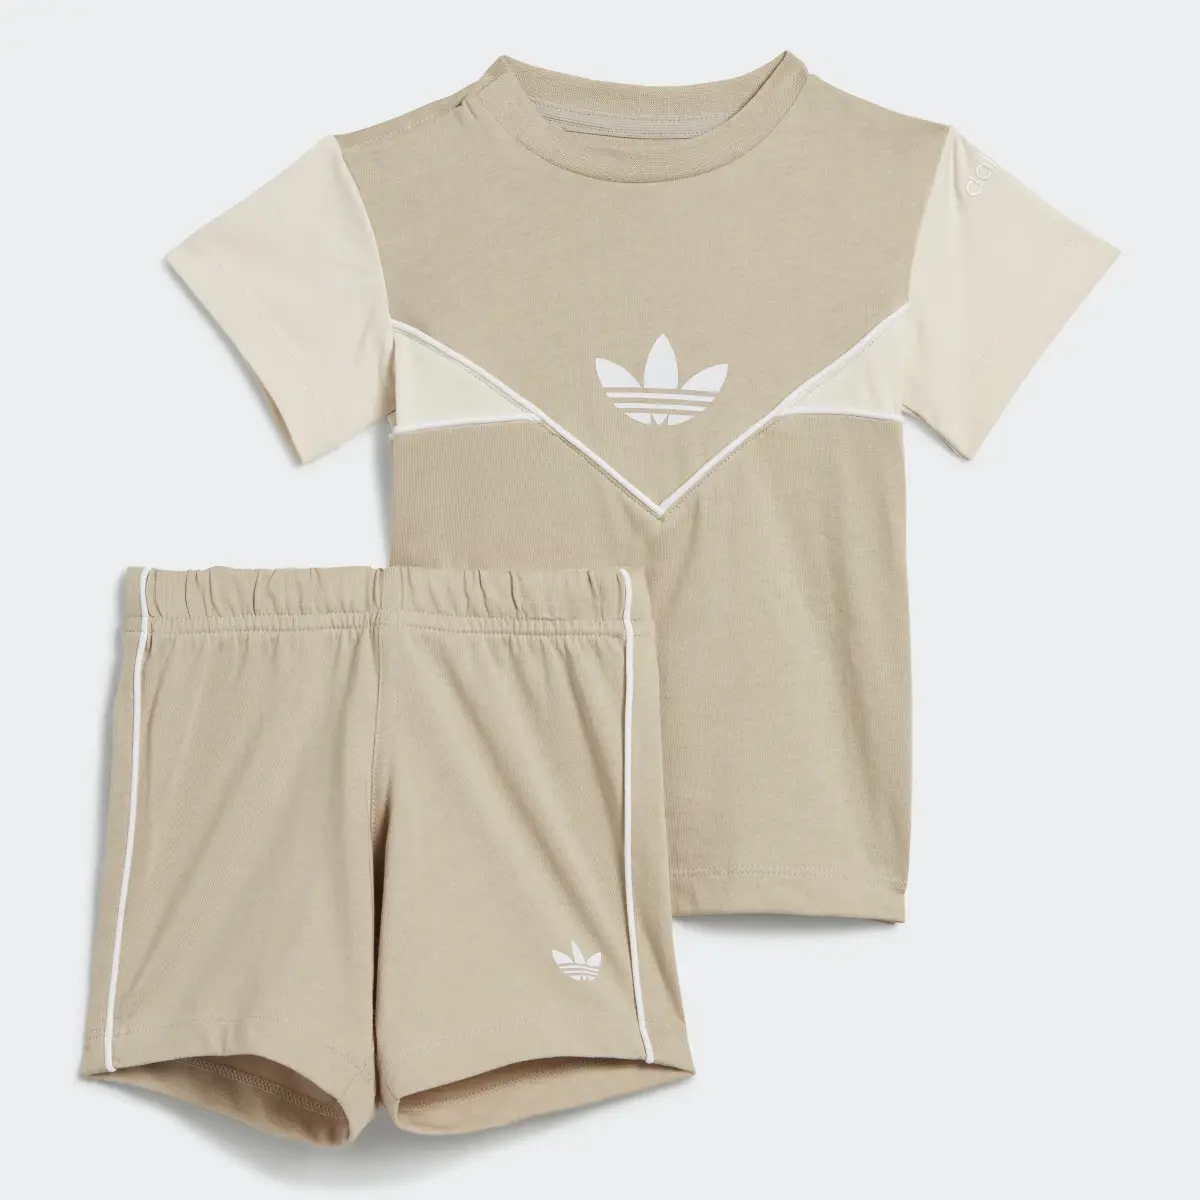 Adidas Completo adicolor Shorts and Tee. 1